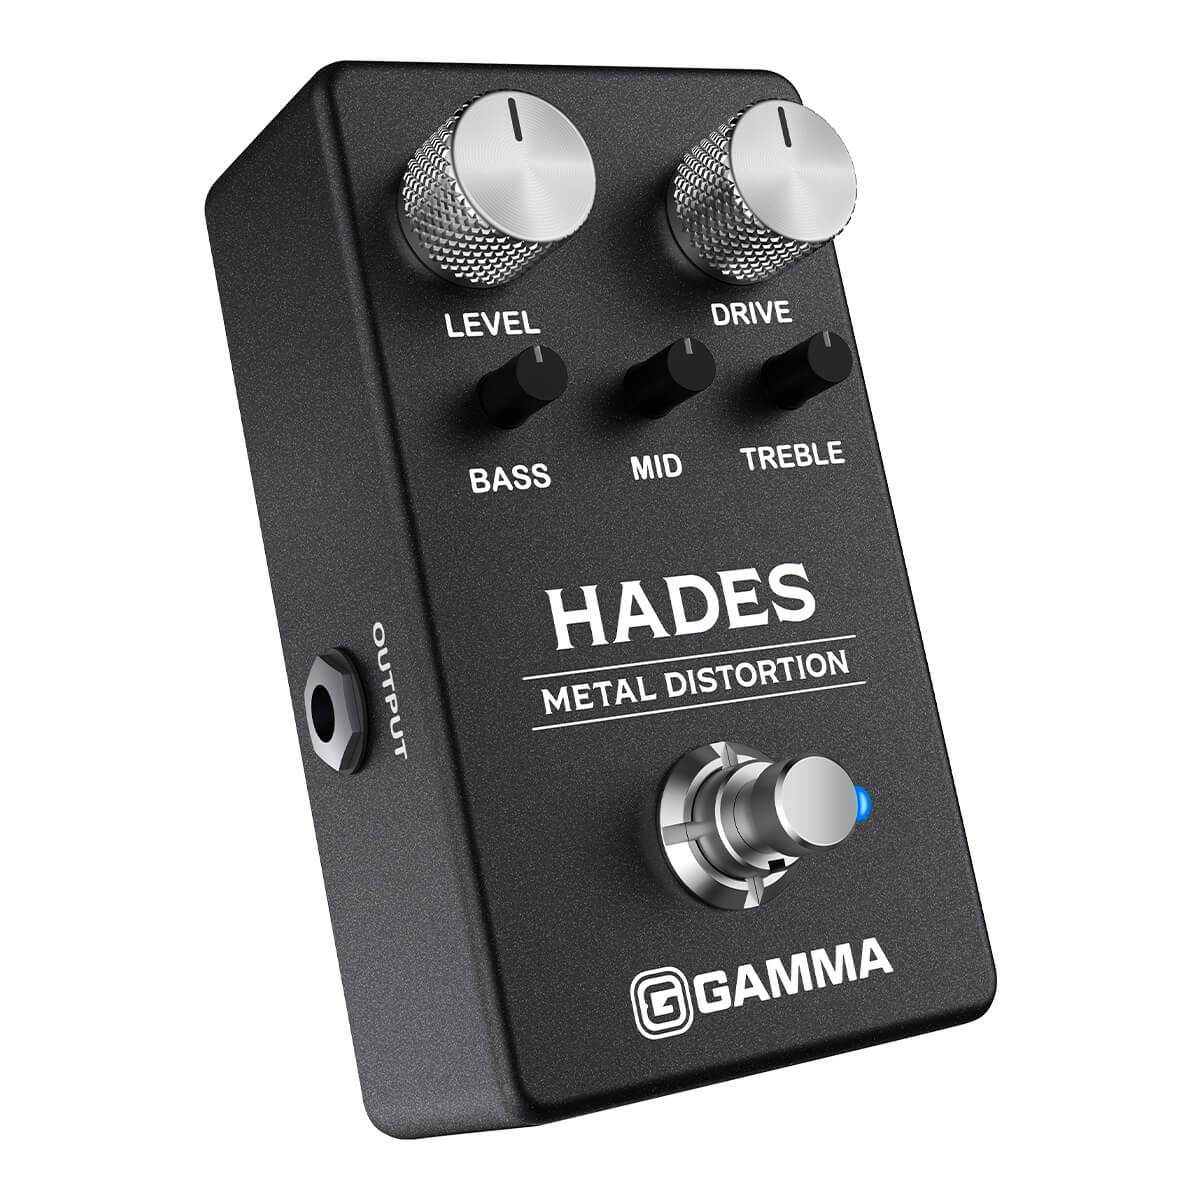 Gamma Hades metal distortion pedal angled right.